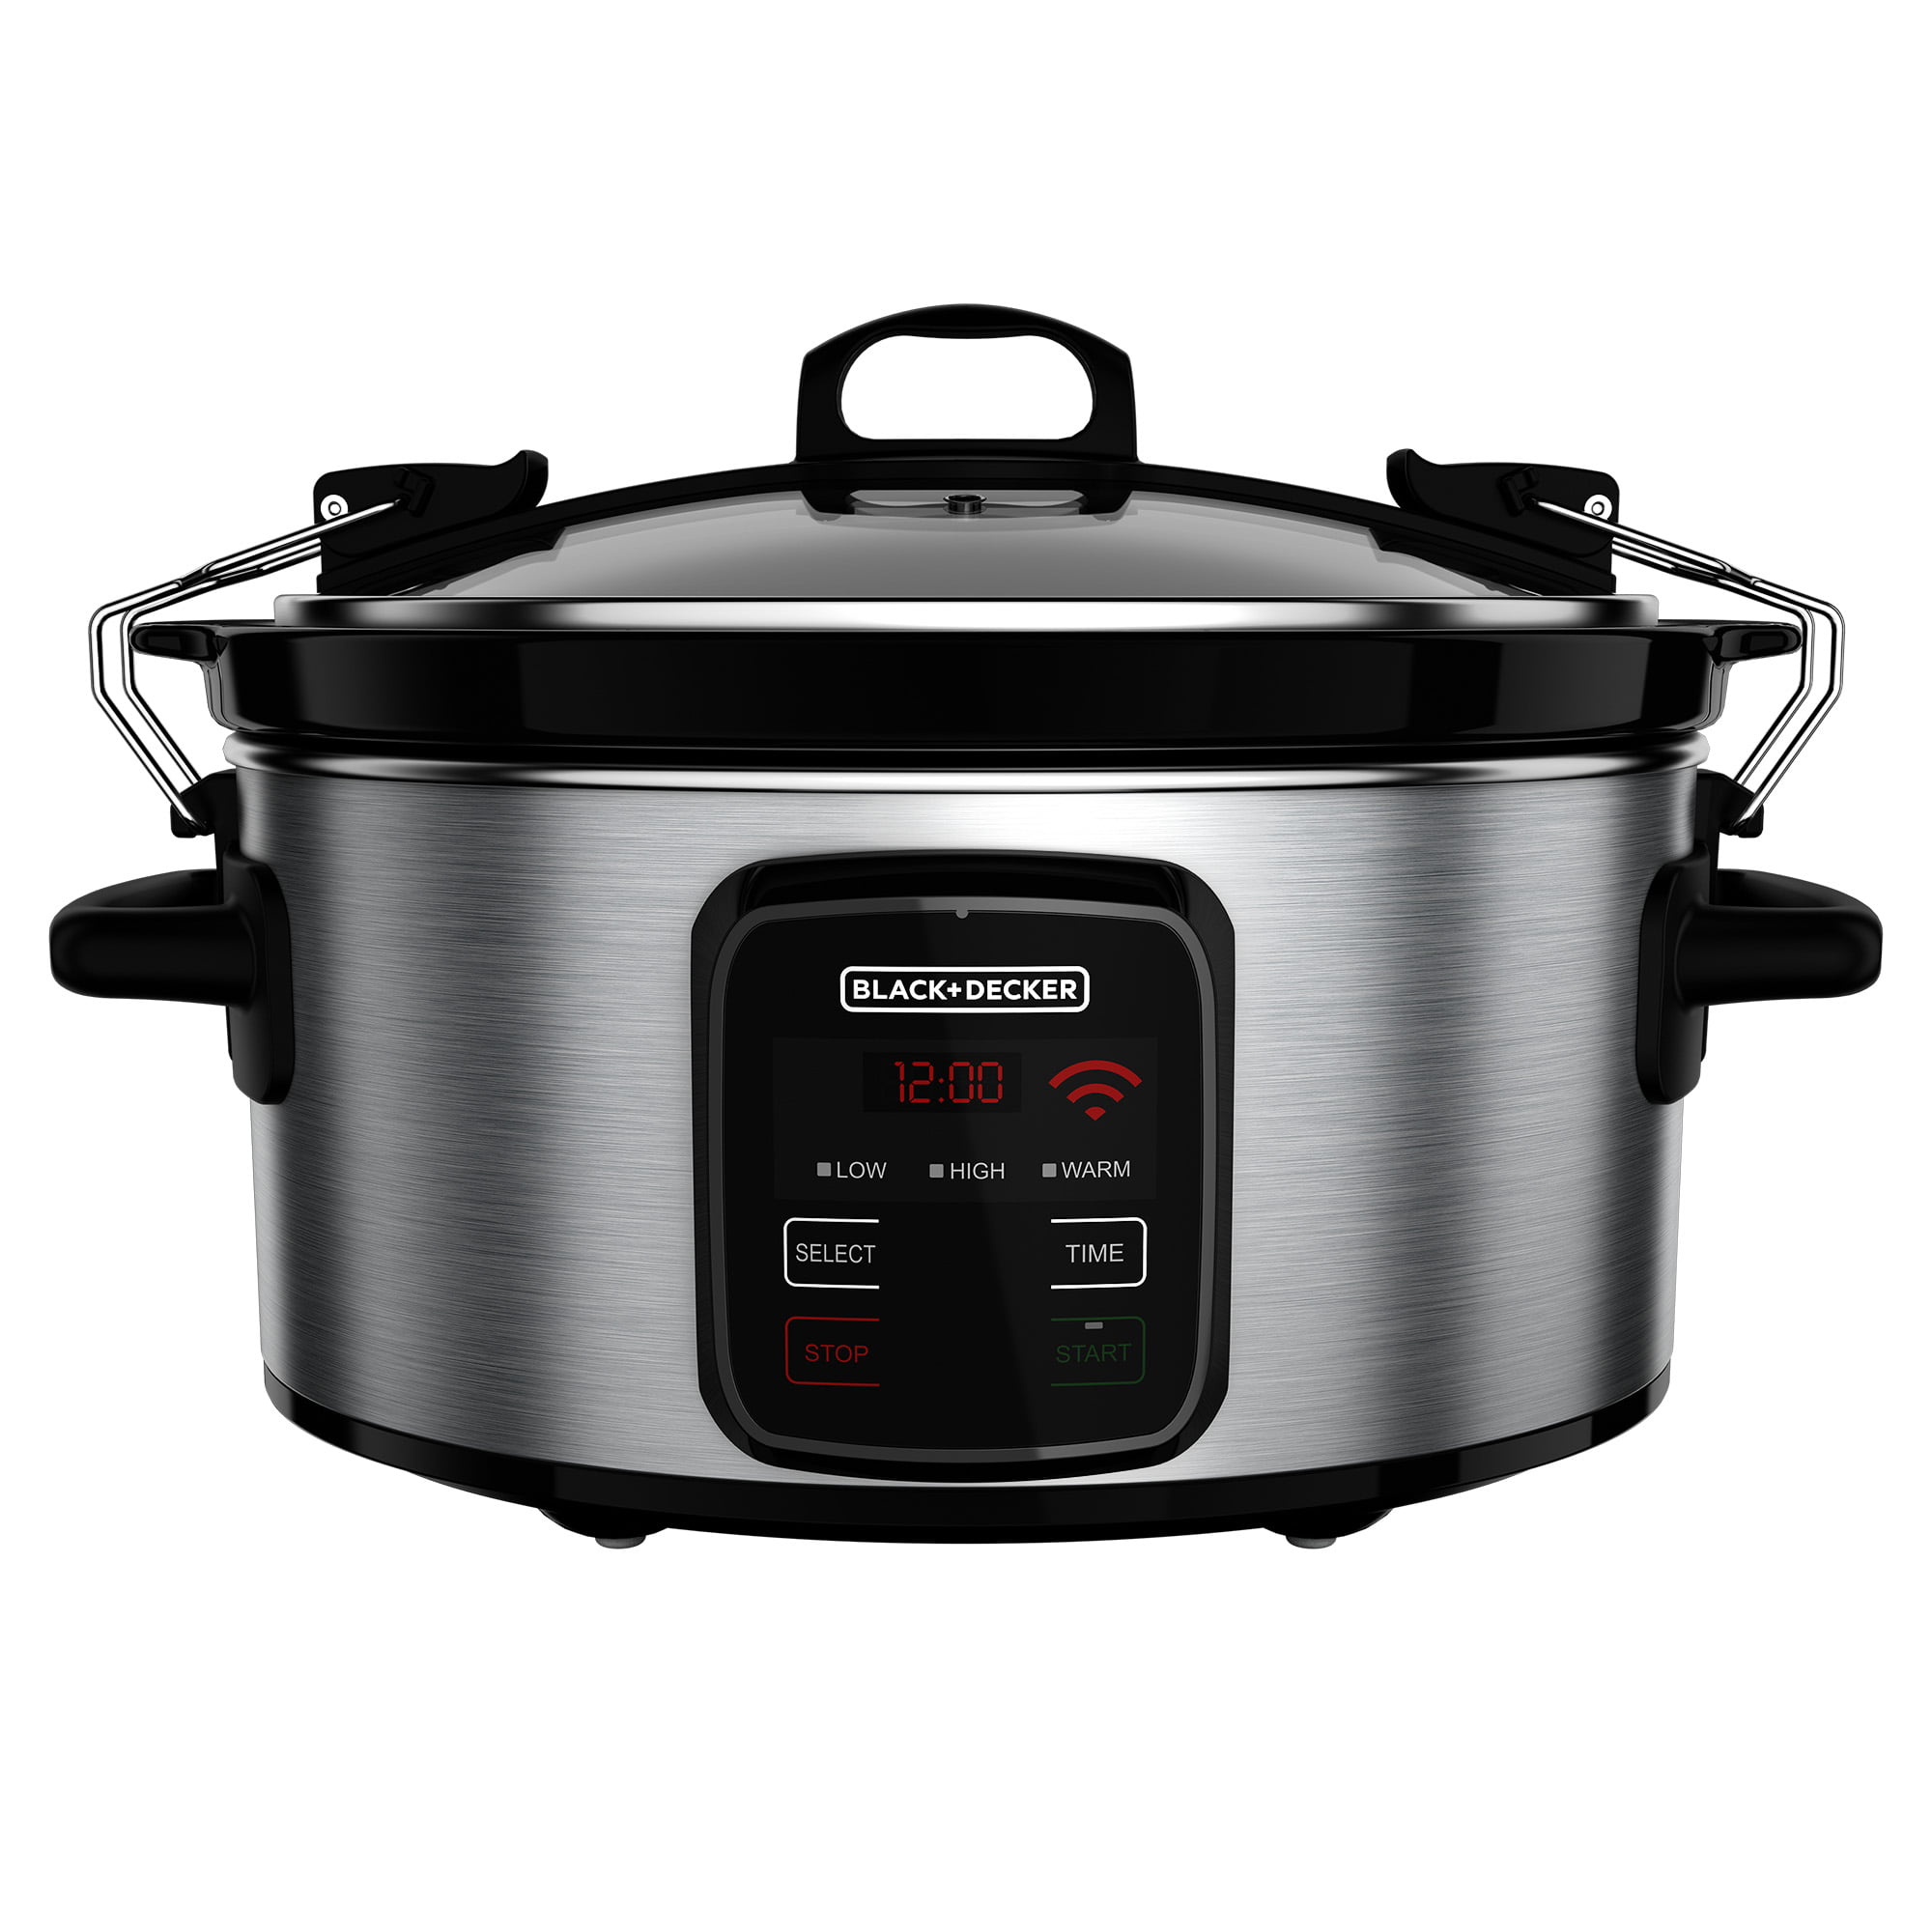 BLACK+DECKER WiFi Enabled 6-Quart Slow Cooker, Stainless